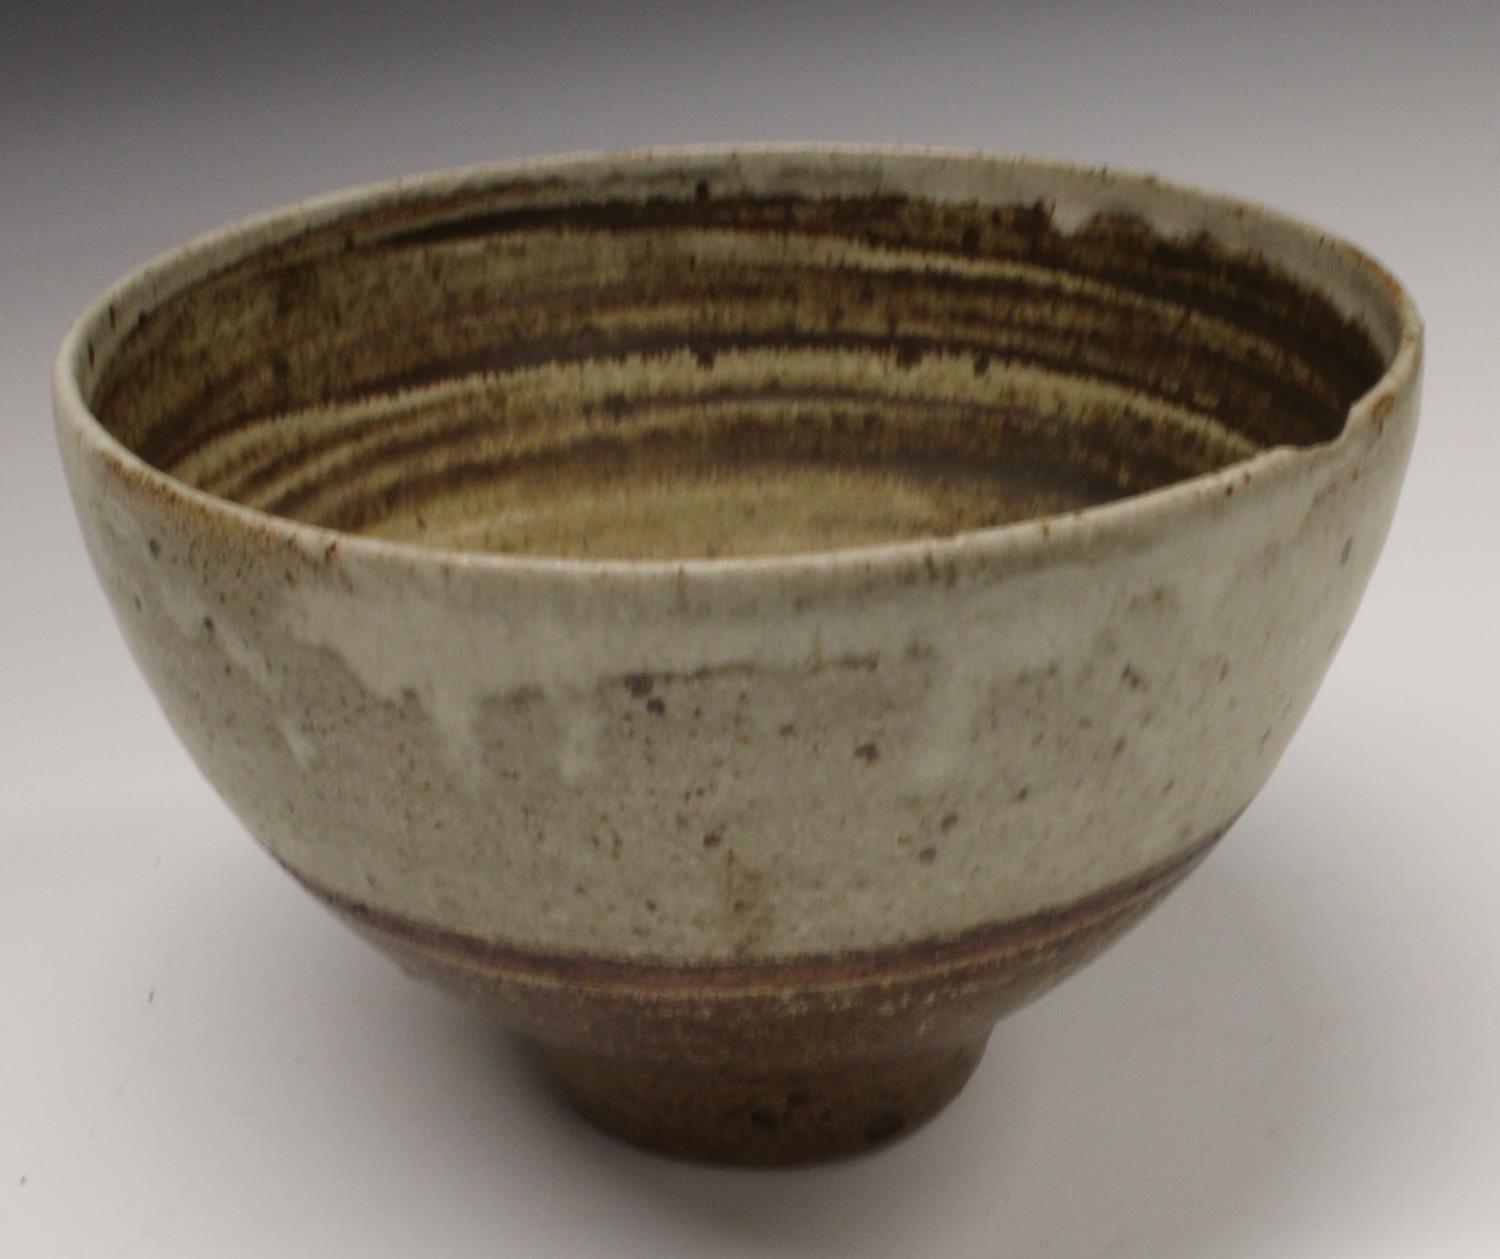 A Joanna Constantinidis style conical bowl, mottled grey glaze, 16. - Image 2 of 3